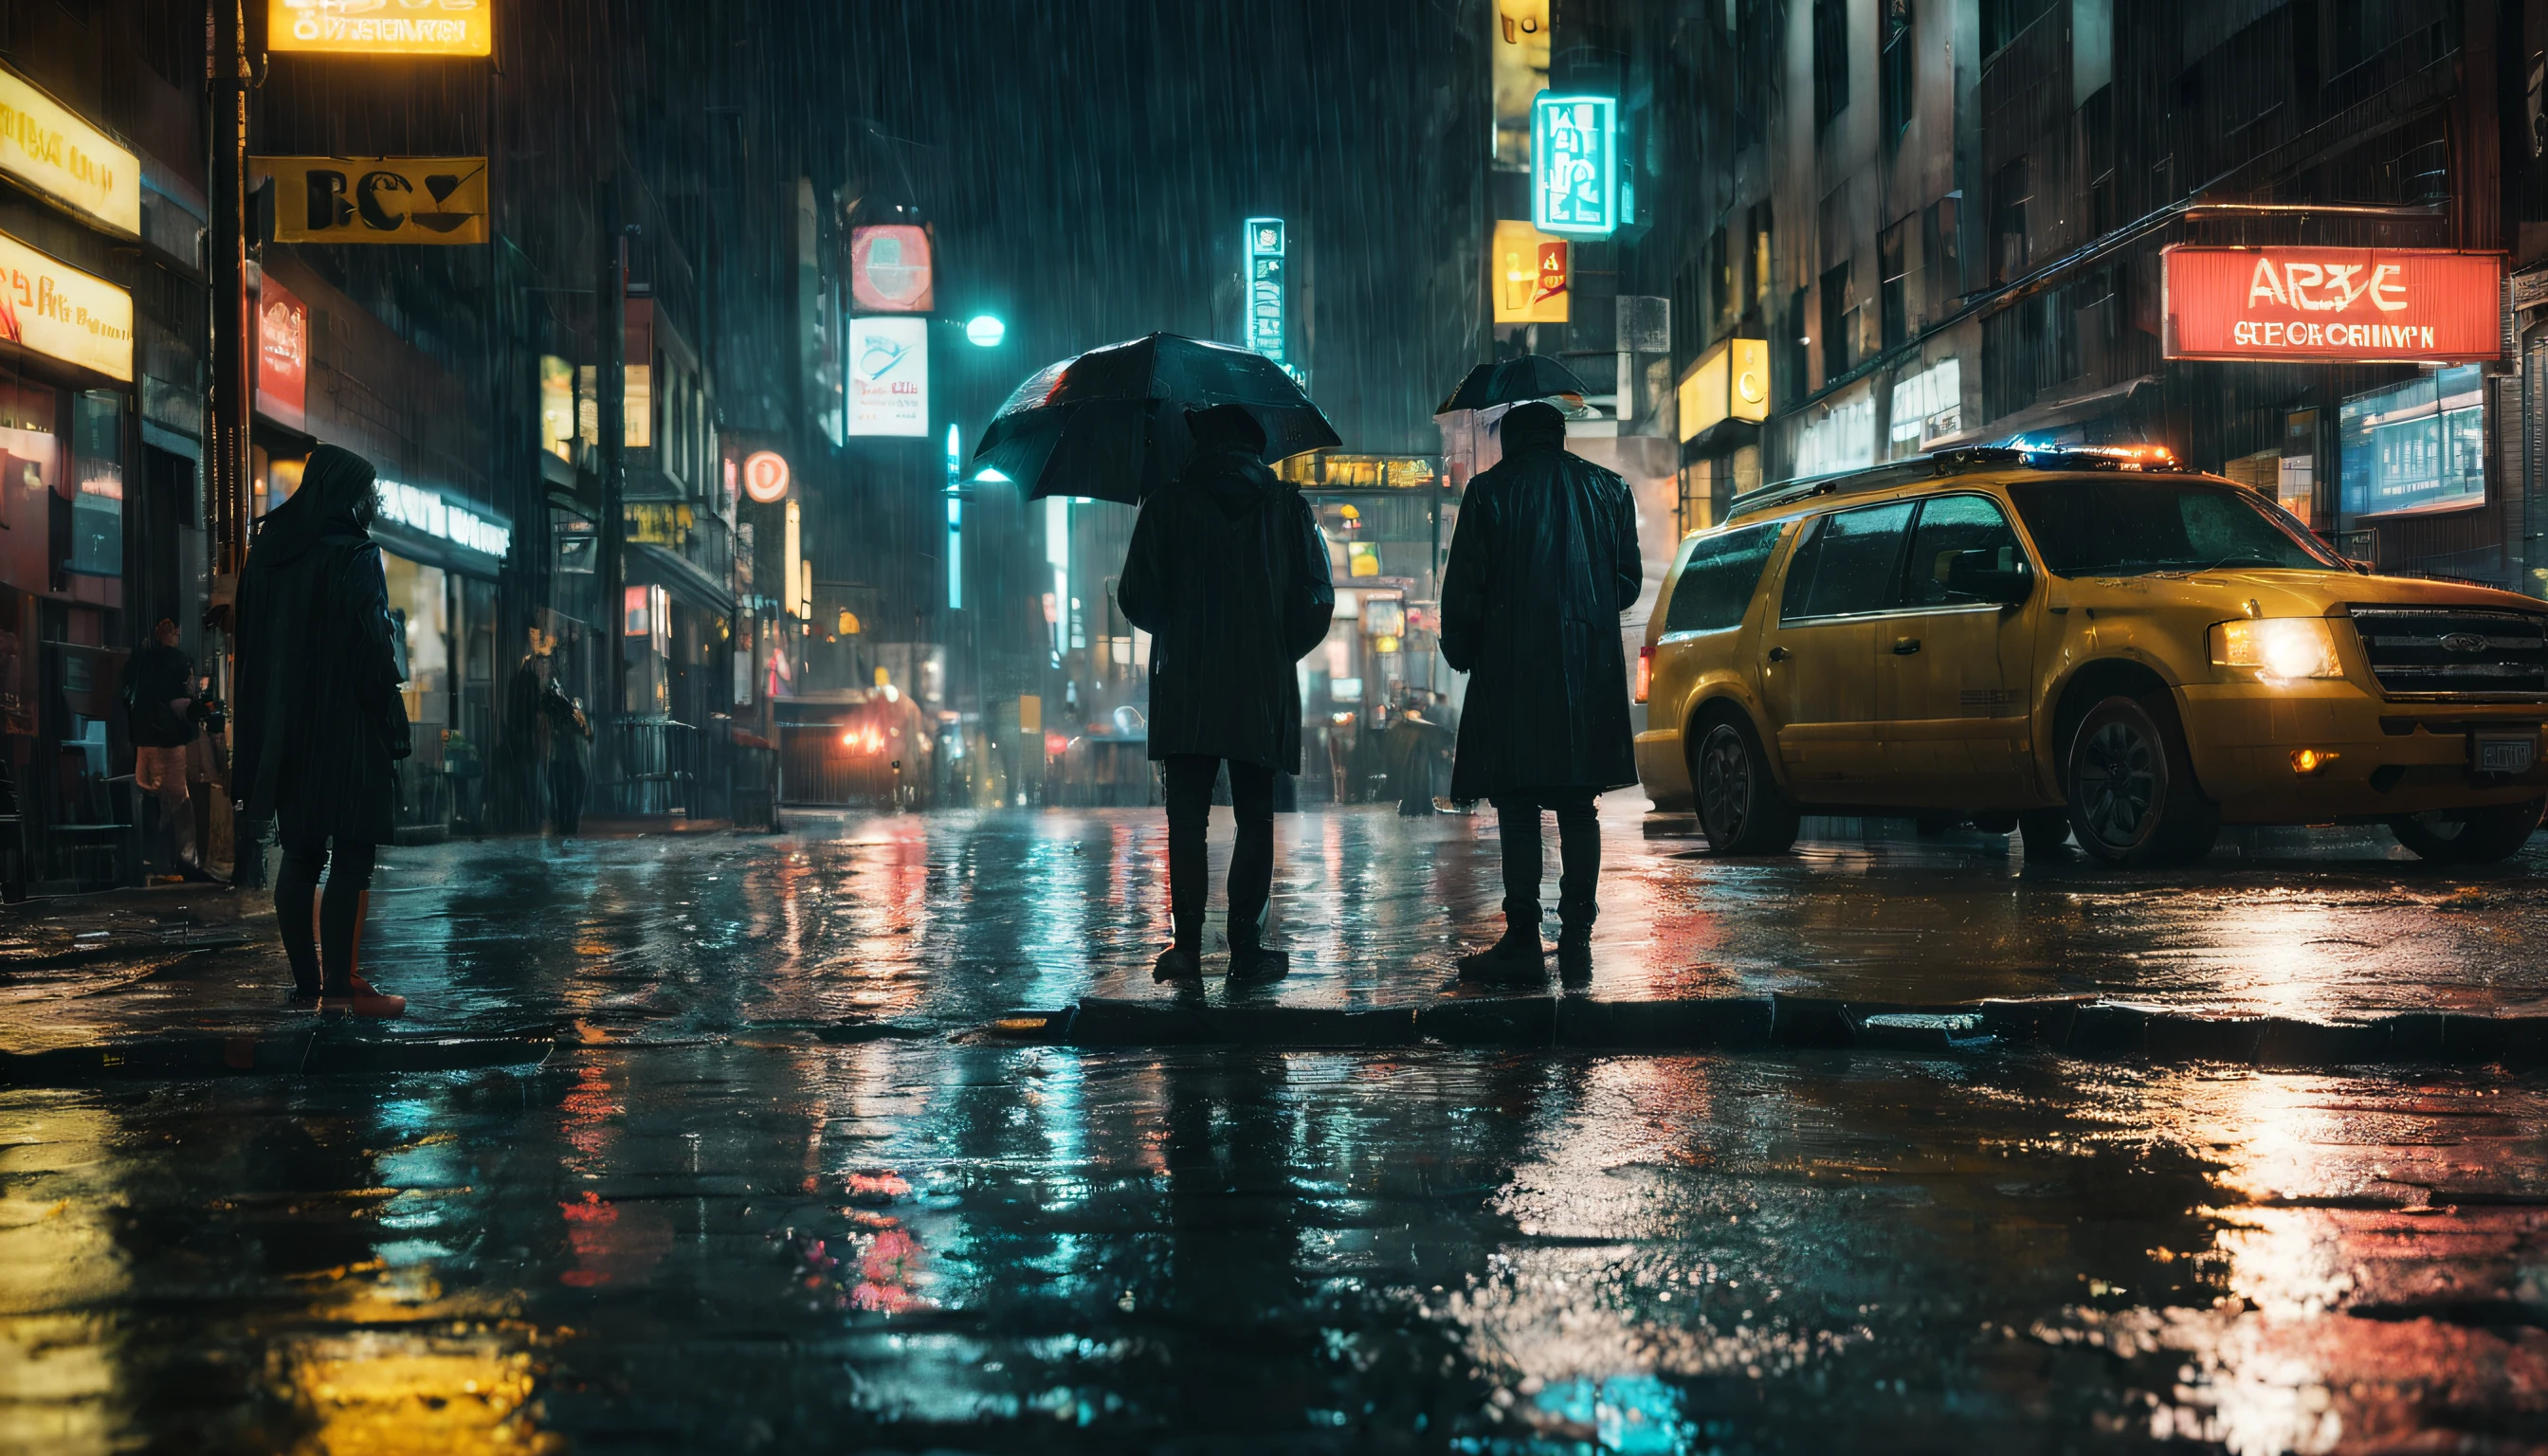 AWARD-WINNING PROFESSIONAL PHOTOGRAPHY, National geographic, on the ground view, a street drain over floating rain, of a 2050 New York city downtown after a rainy night, four friends waiting and looking for the city bus at the bus stop, HYPER-REALISTIC, CYBERPUNK, Cinematic Scene, Cityscape, Moody, Neon-lit, View from above at night during heavy rainfall, reflective wet streets, Photorealistic, Extremely well made,  Arri Alexa with aerial rig, 20mm lens, Light streaks, Shallow depth of field, Lens flares, 8K, HDR, Volumetric lighting, Lens flares, Expansive landscapes, Intricate details.